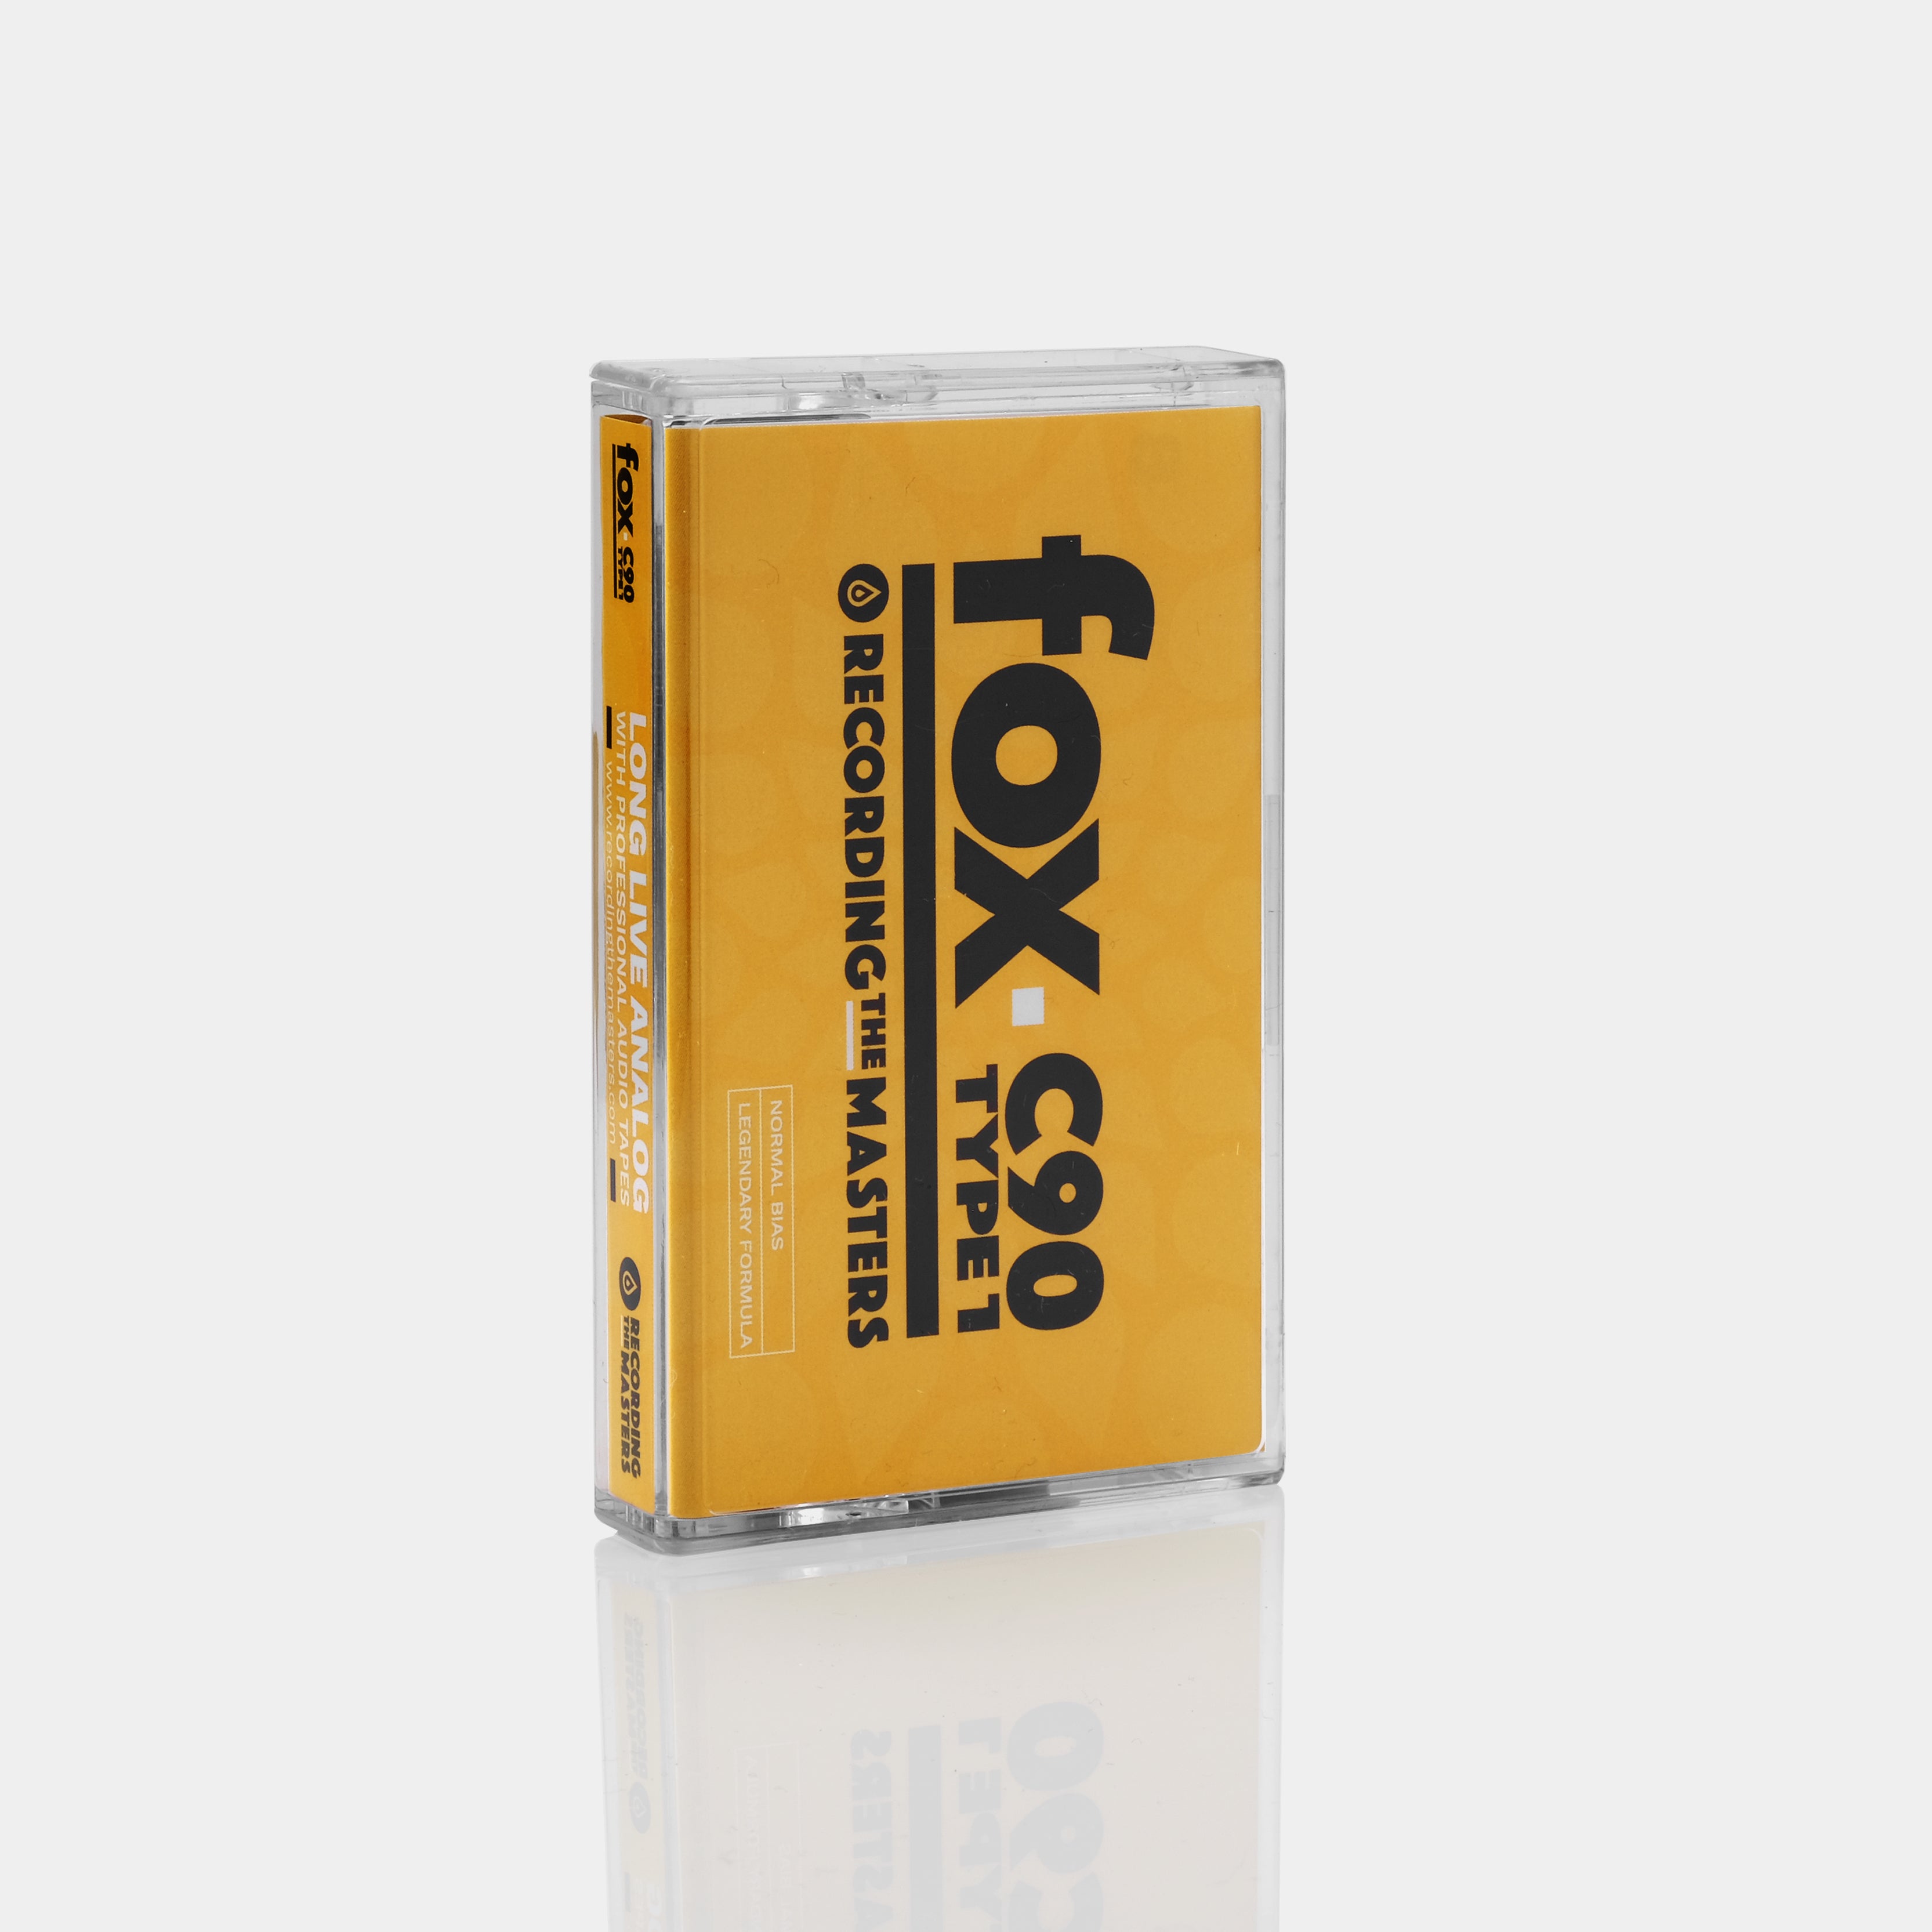 Fox C90 Type I Blank Recordable Cassette Tape